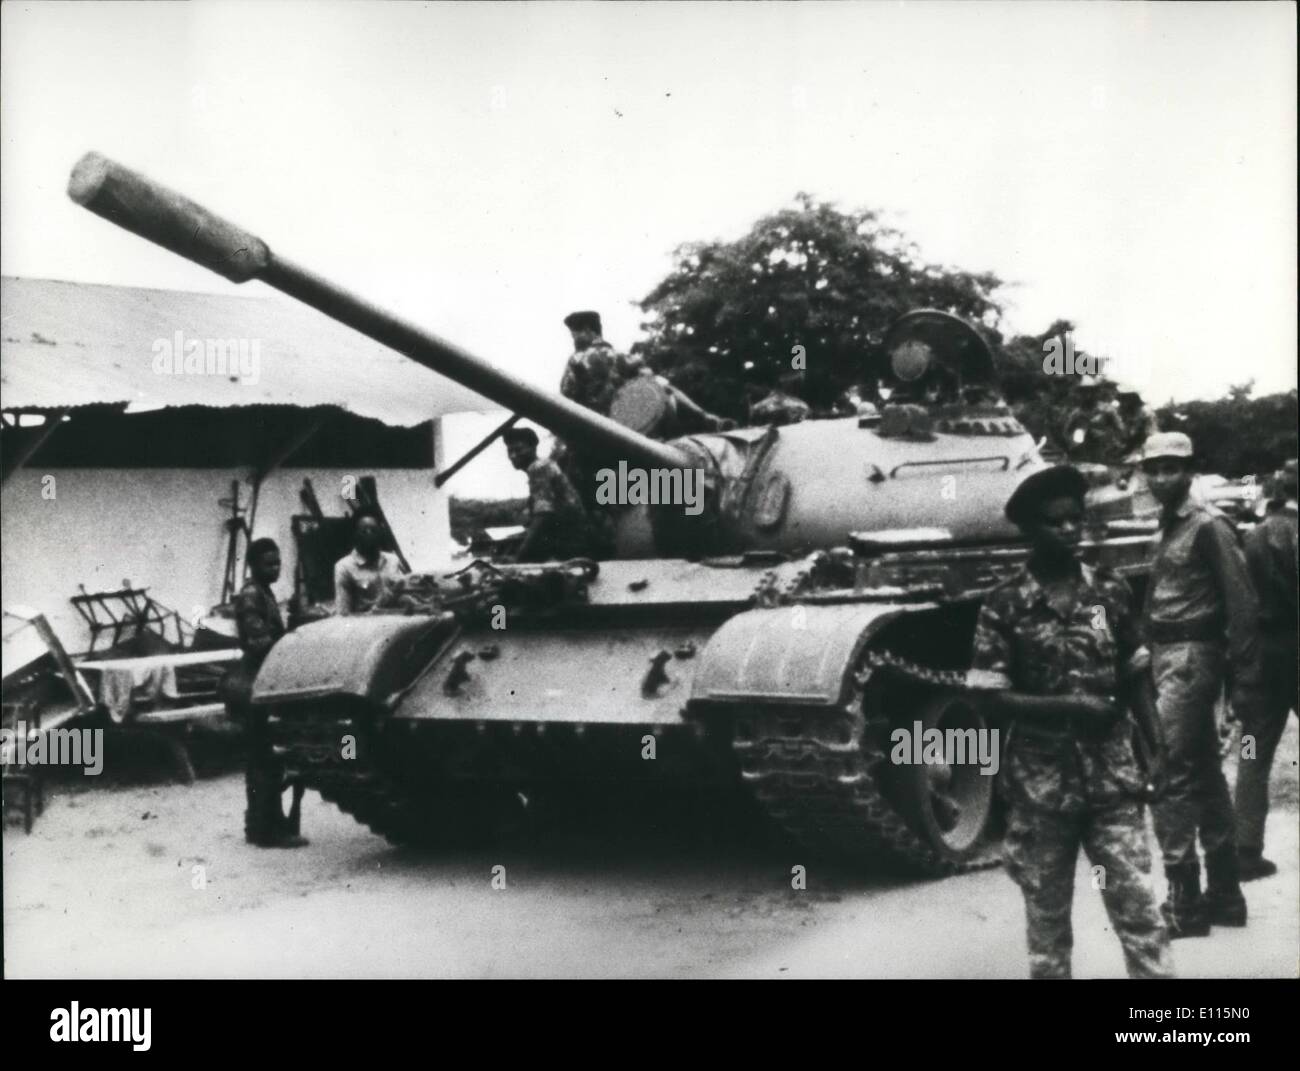 Jan. 01, 1976 - Soviet Tanks and planes in action in Angola. Photo shows a Soviet T-54 tank on show in the Angolan capital of Luanda where Russian made weapons were included in a military parade staged by the M.P.L.A. Stock Photo